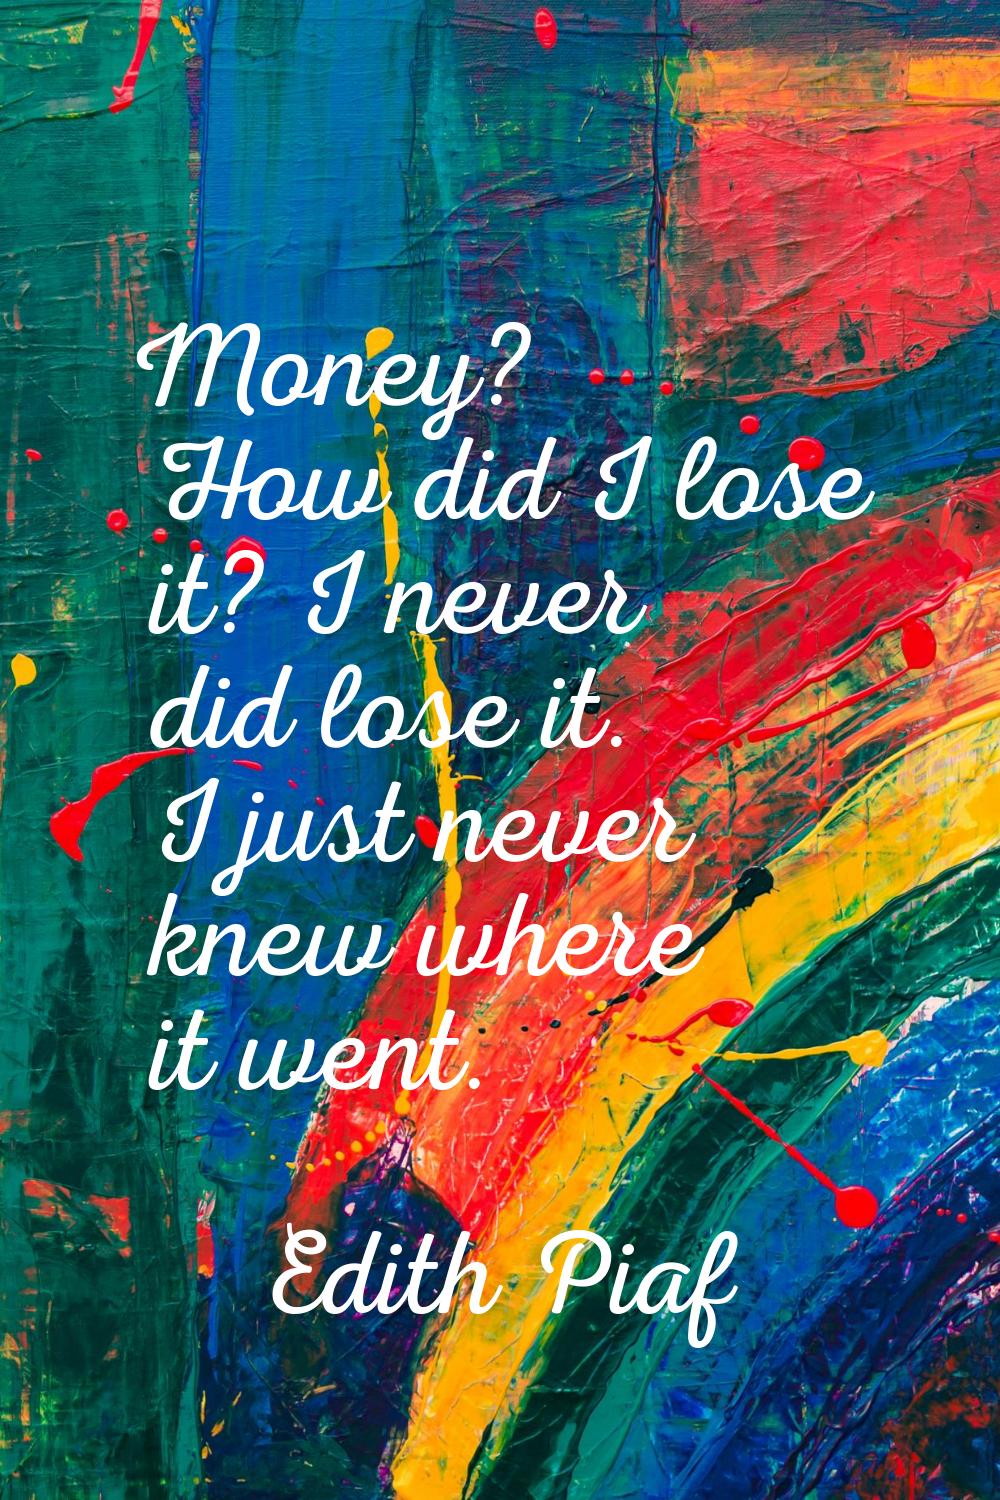 Money? How did I lose it? I never did lose it. I just never knew where it went.